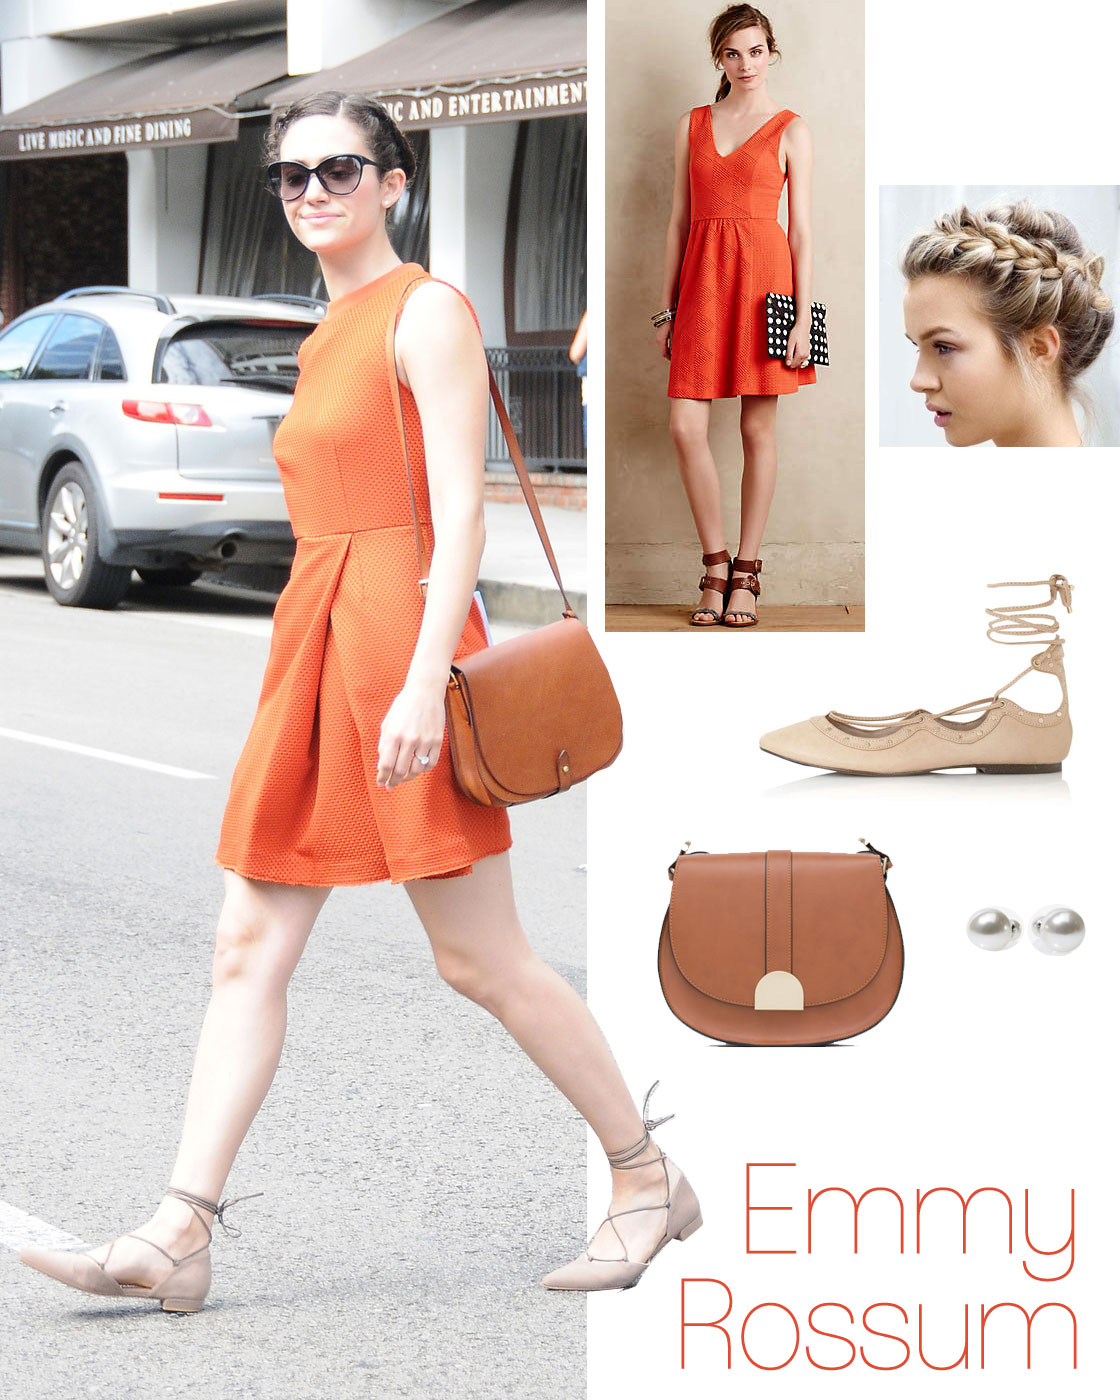 Emmy Rossum's orange dress and nude lace up flats